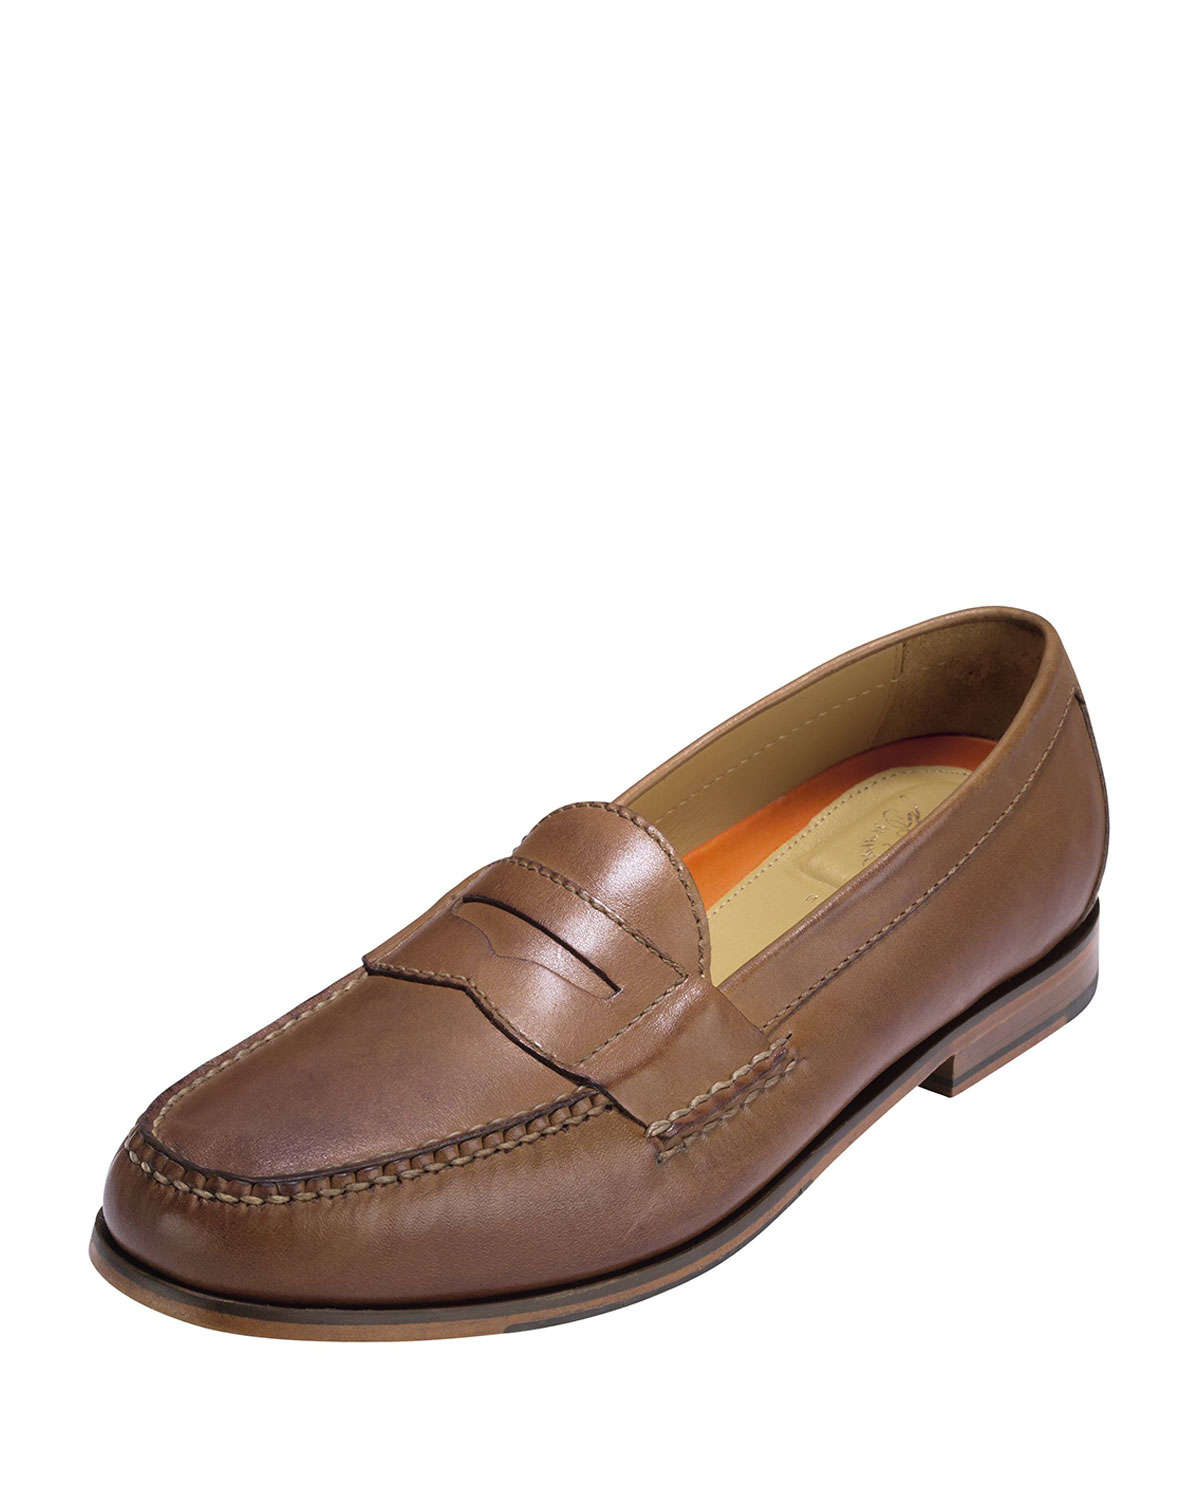 Lyst - Cole Haan Pinch Grand Penny Loafer in Brown for Men